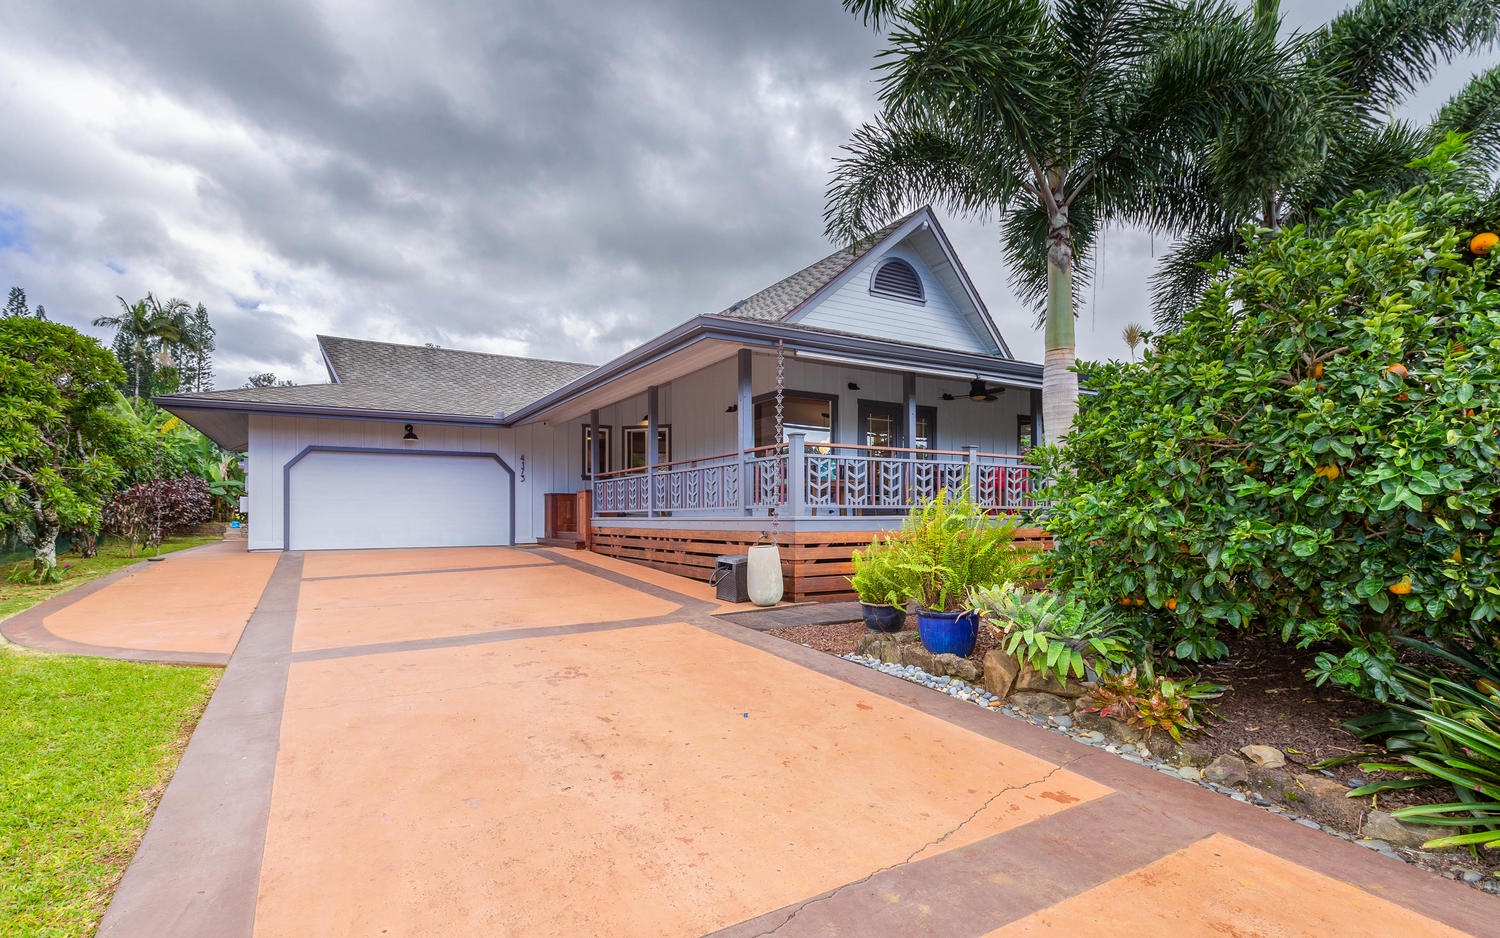 Princeville Vacation Rentals, Makana Lei - Front view of the home